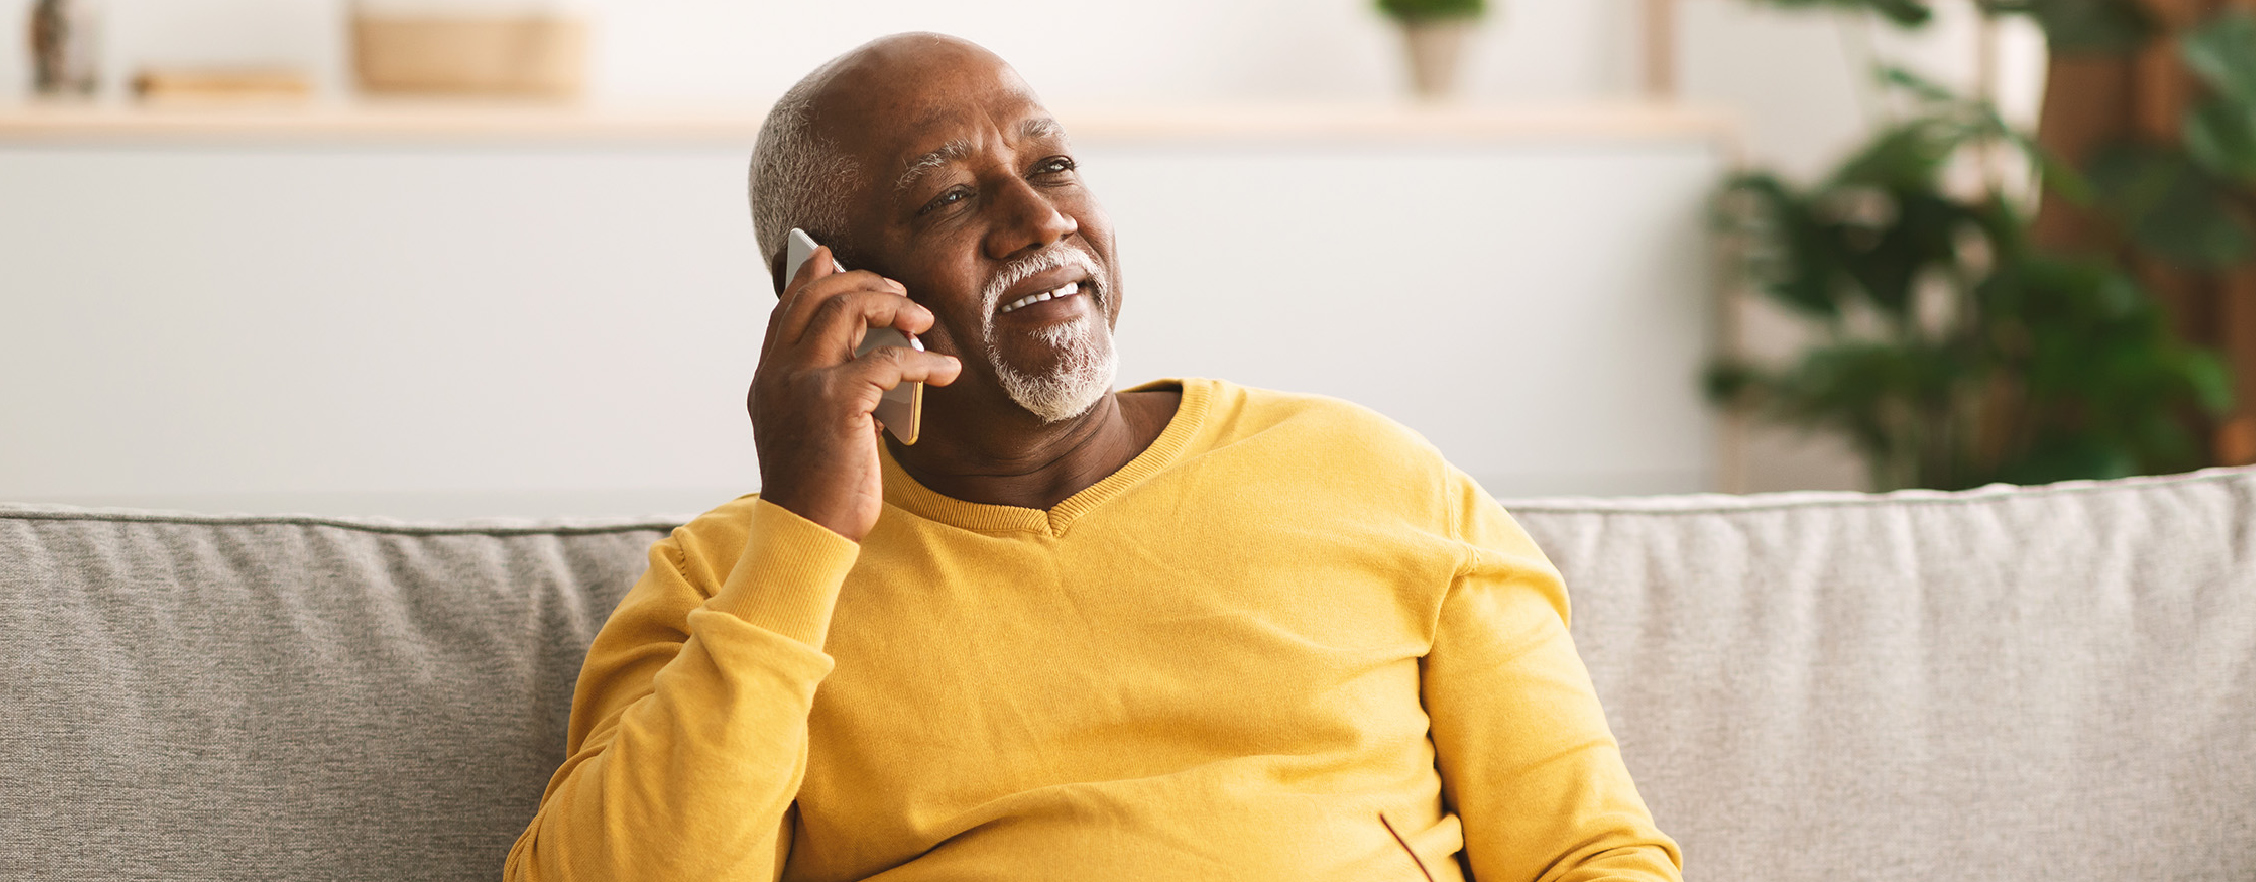 Medicare beneficiary talking on phone 